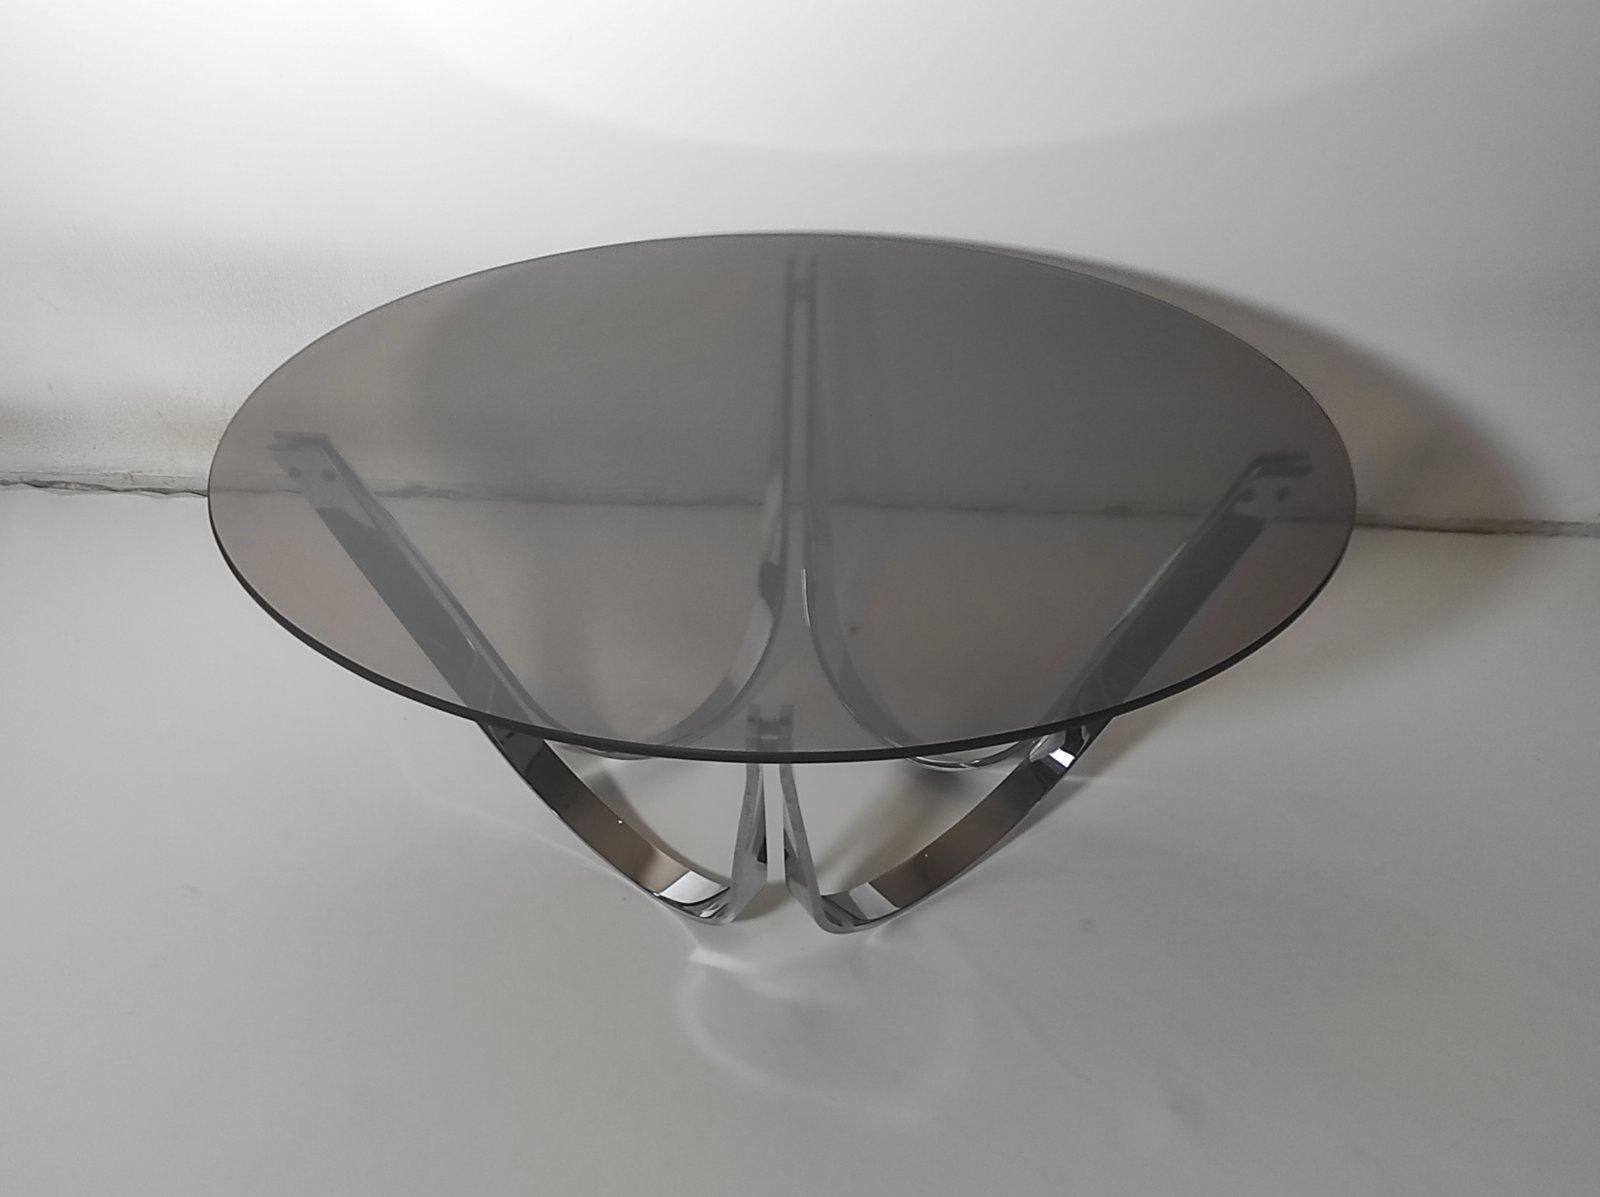 Mid-Century Modern Chrome and Smoked glass Coffee Table By Roger Sprunger for Dunbar 1970s For Sale